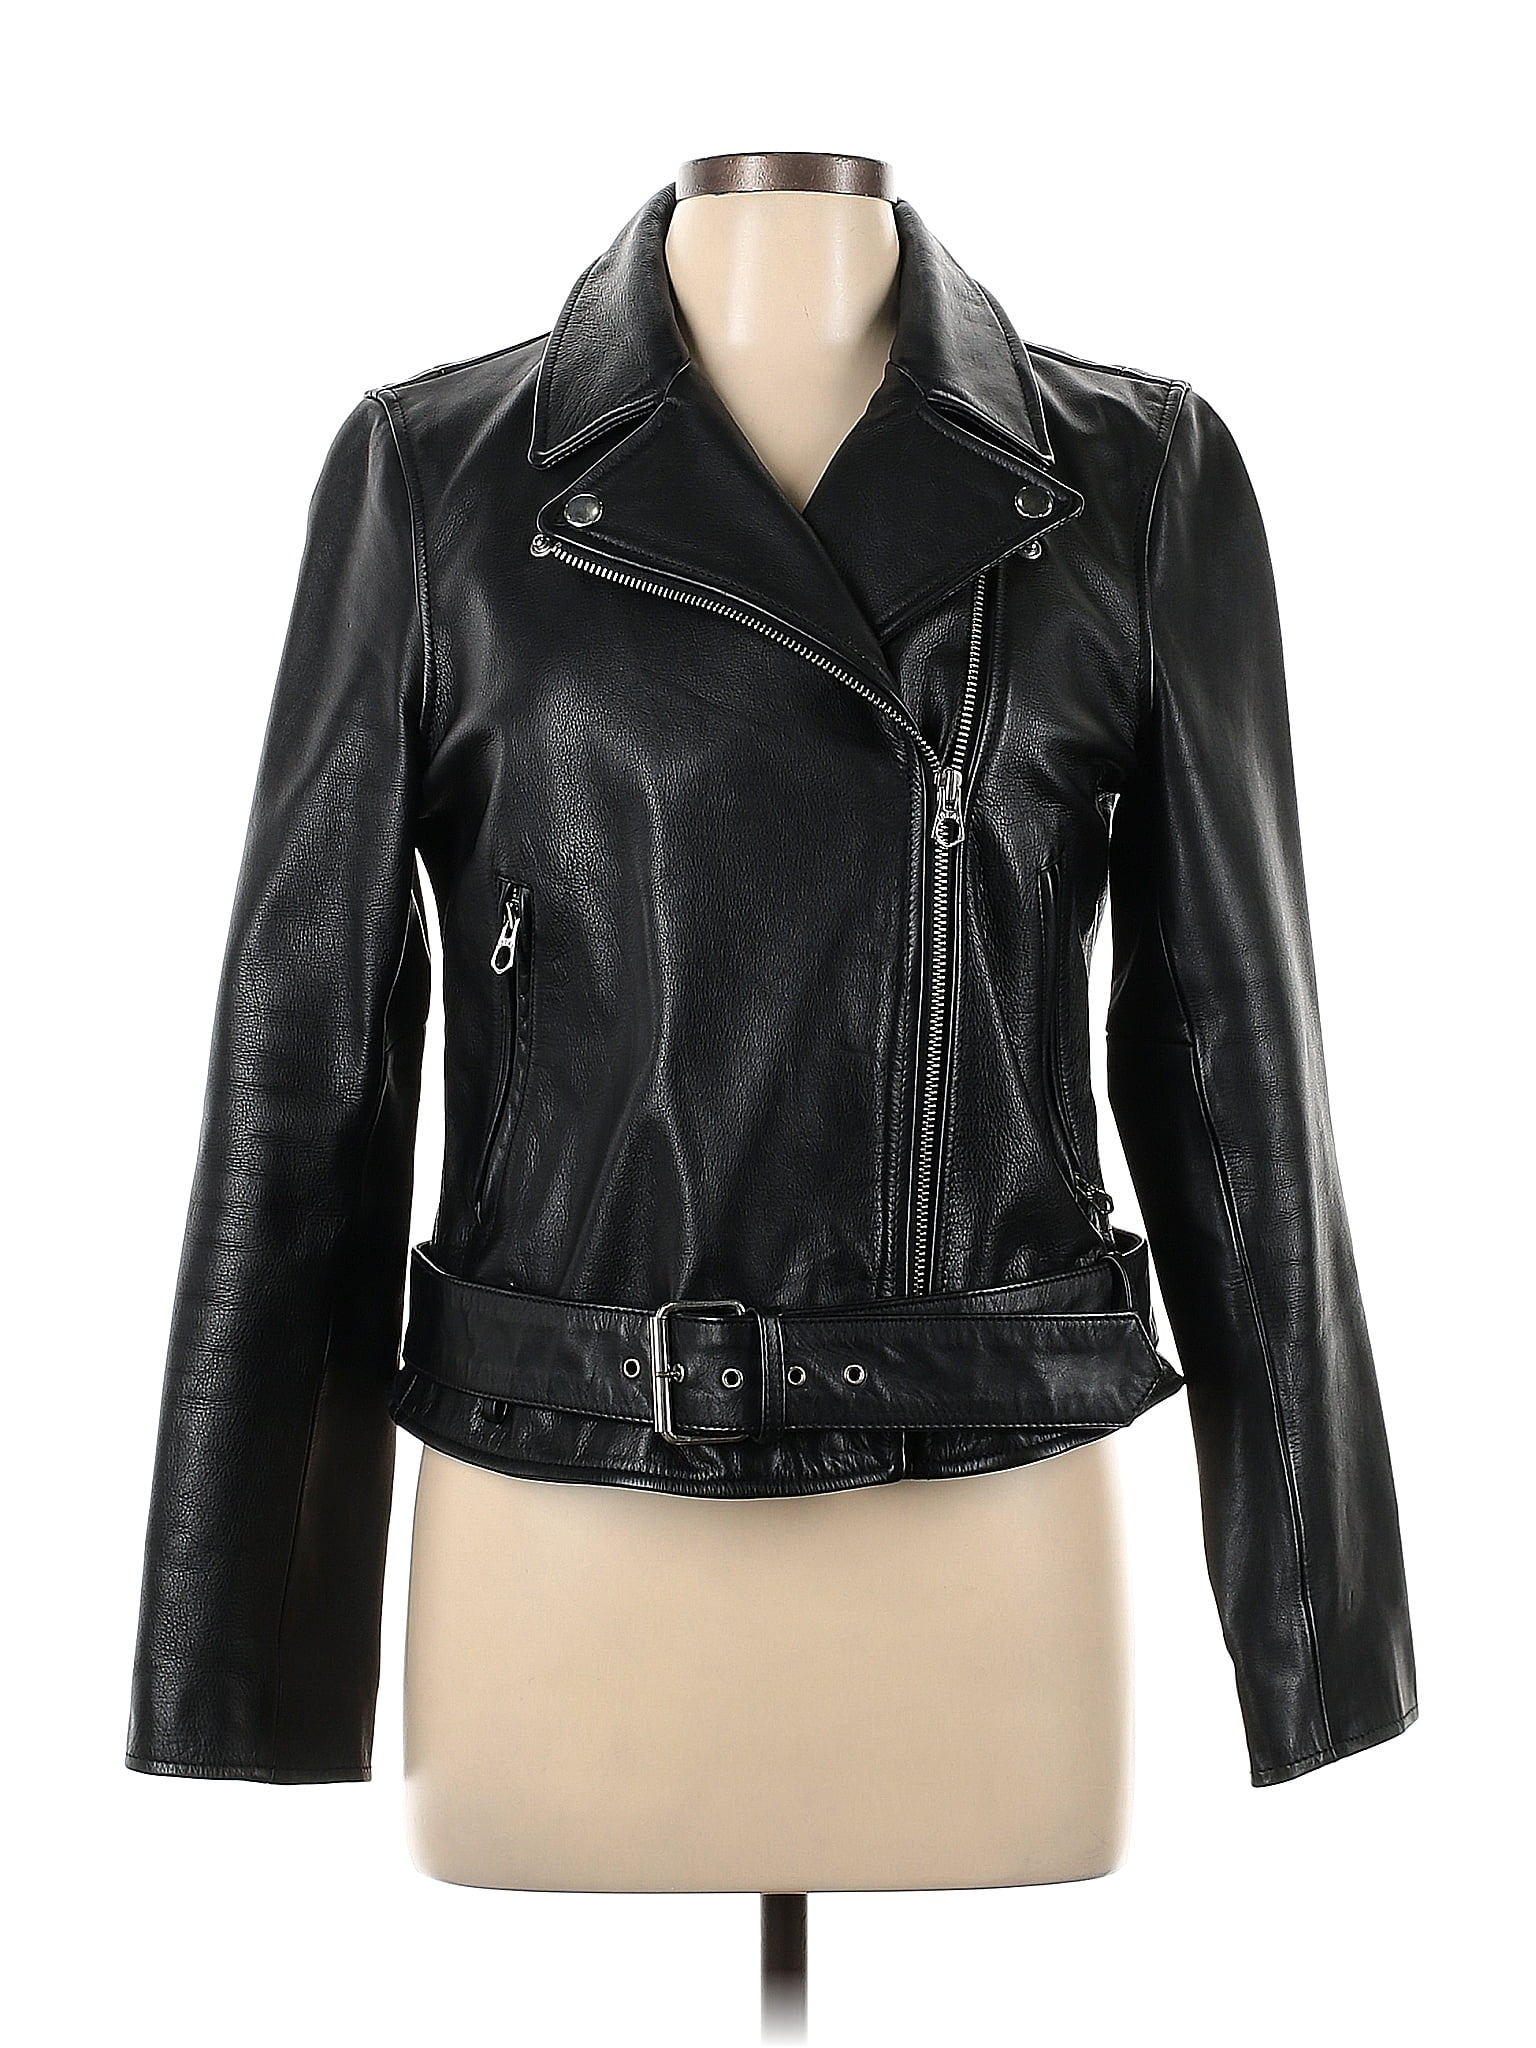 Madewell 100% Modacrylic Solid Black Leather Jacket Size L - 61% off ...